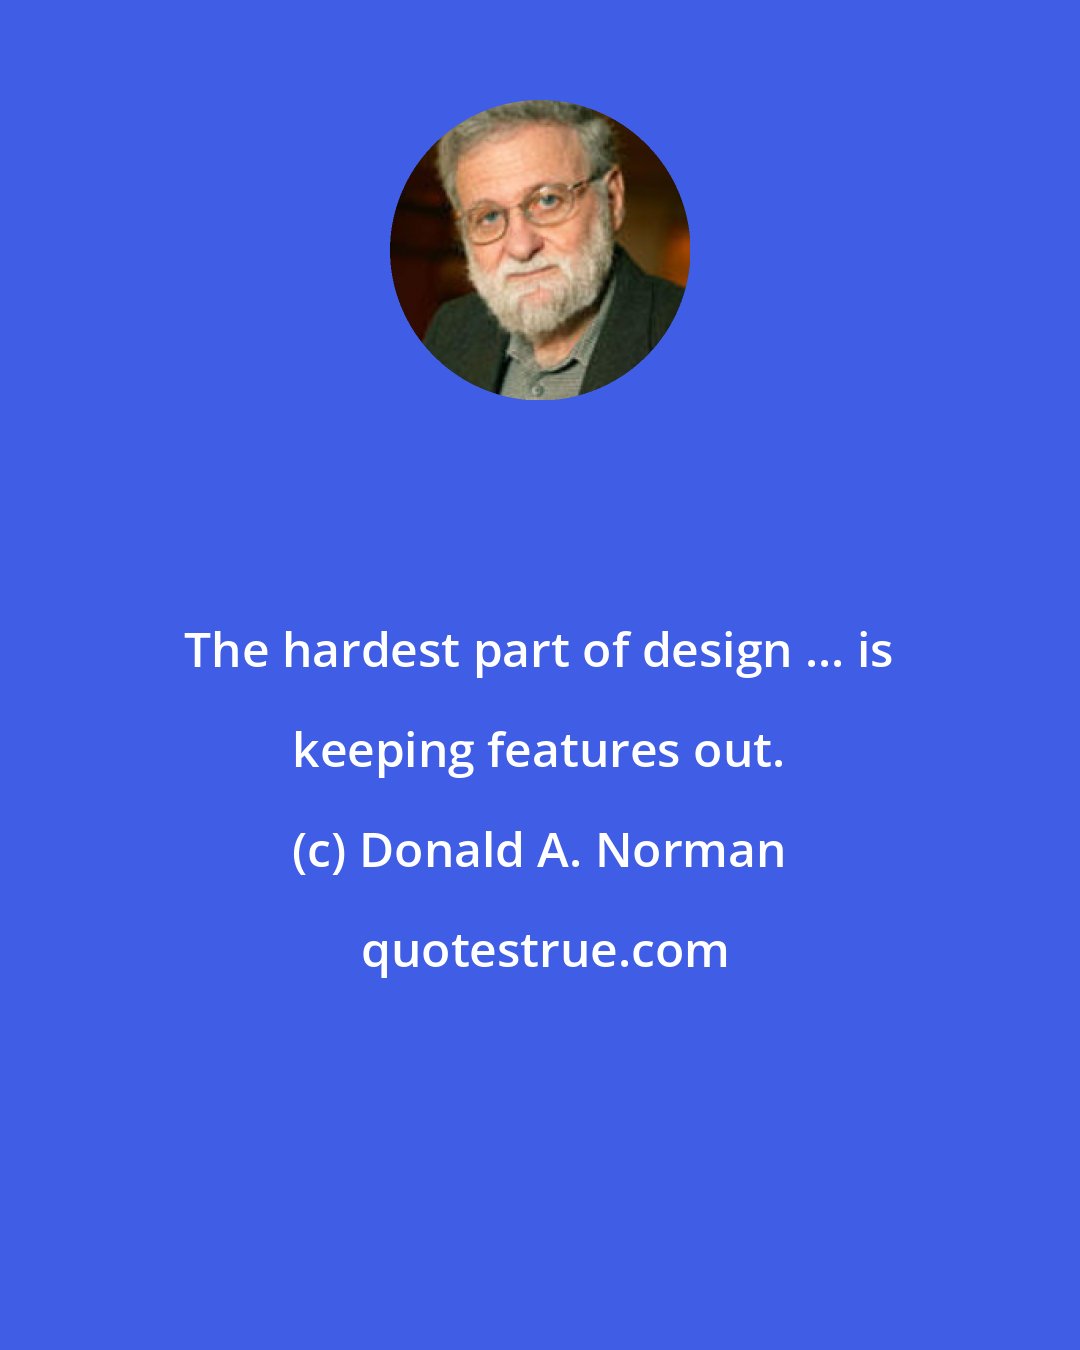 Donald A. Norman: The hardest part of design ... is keeping features out.